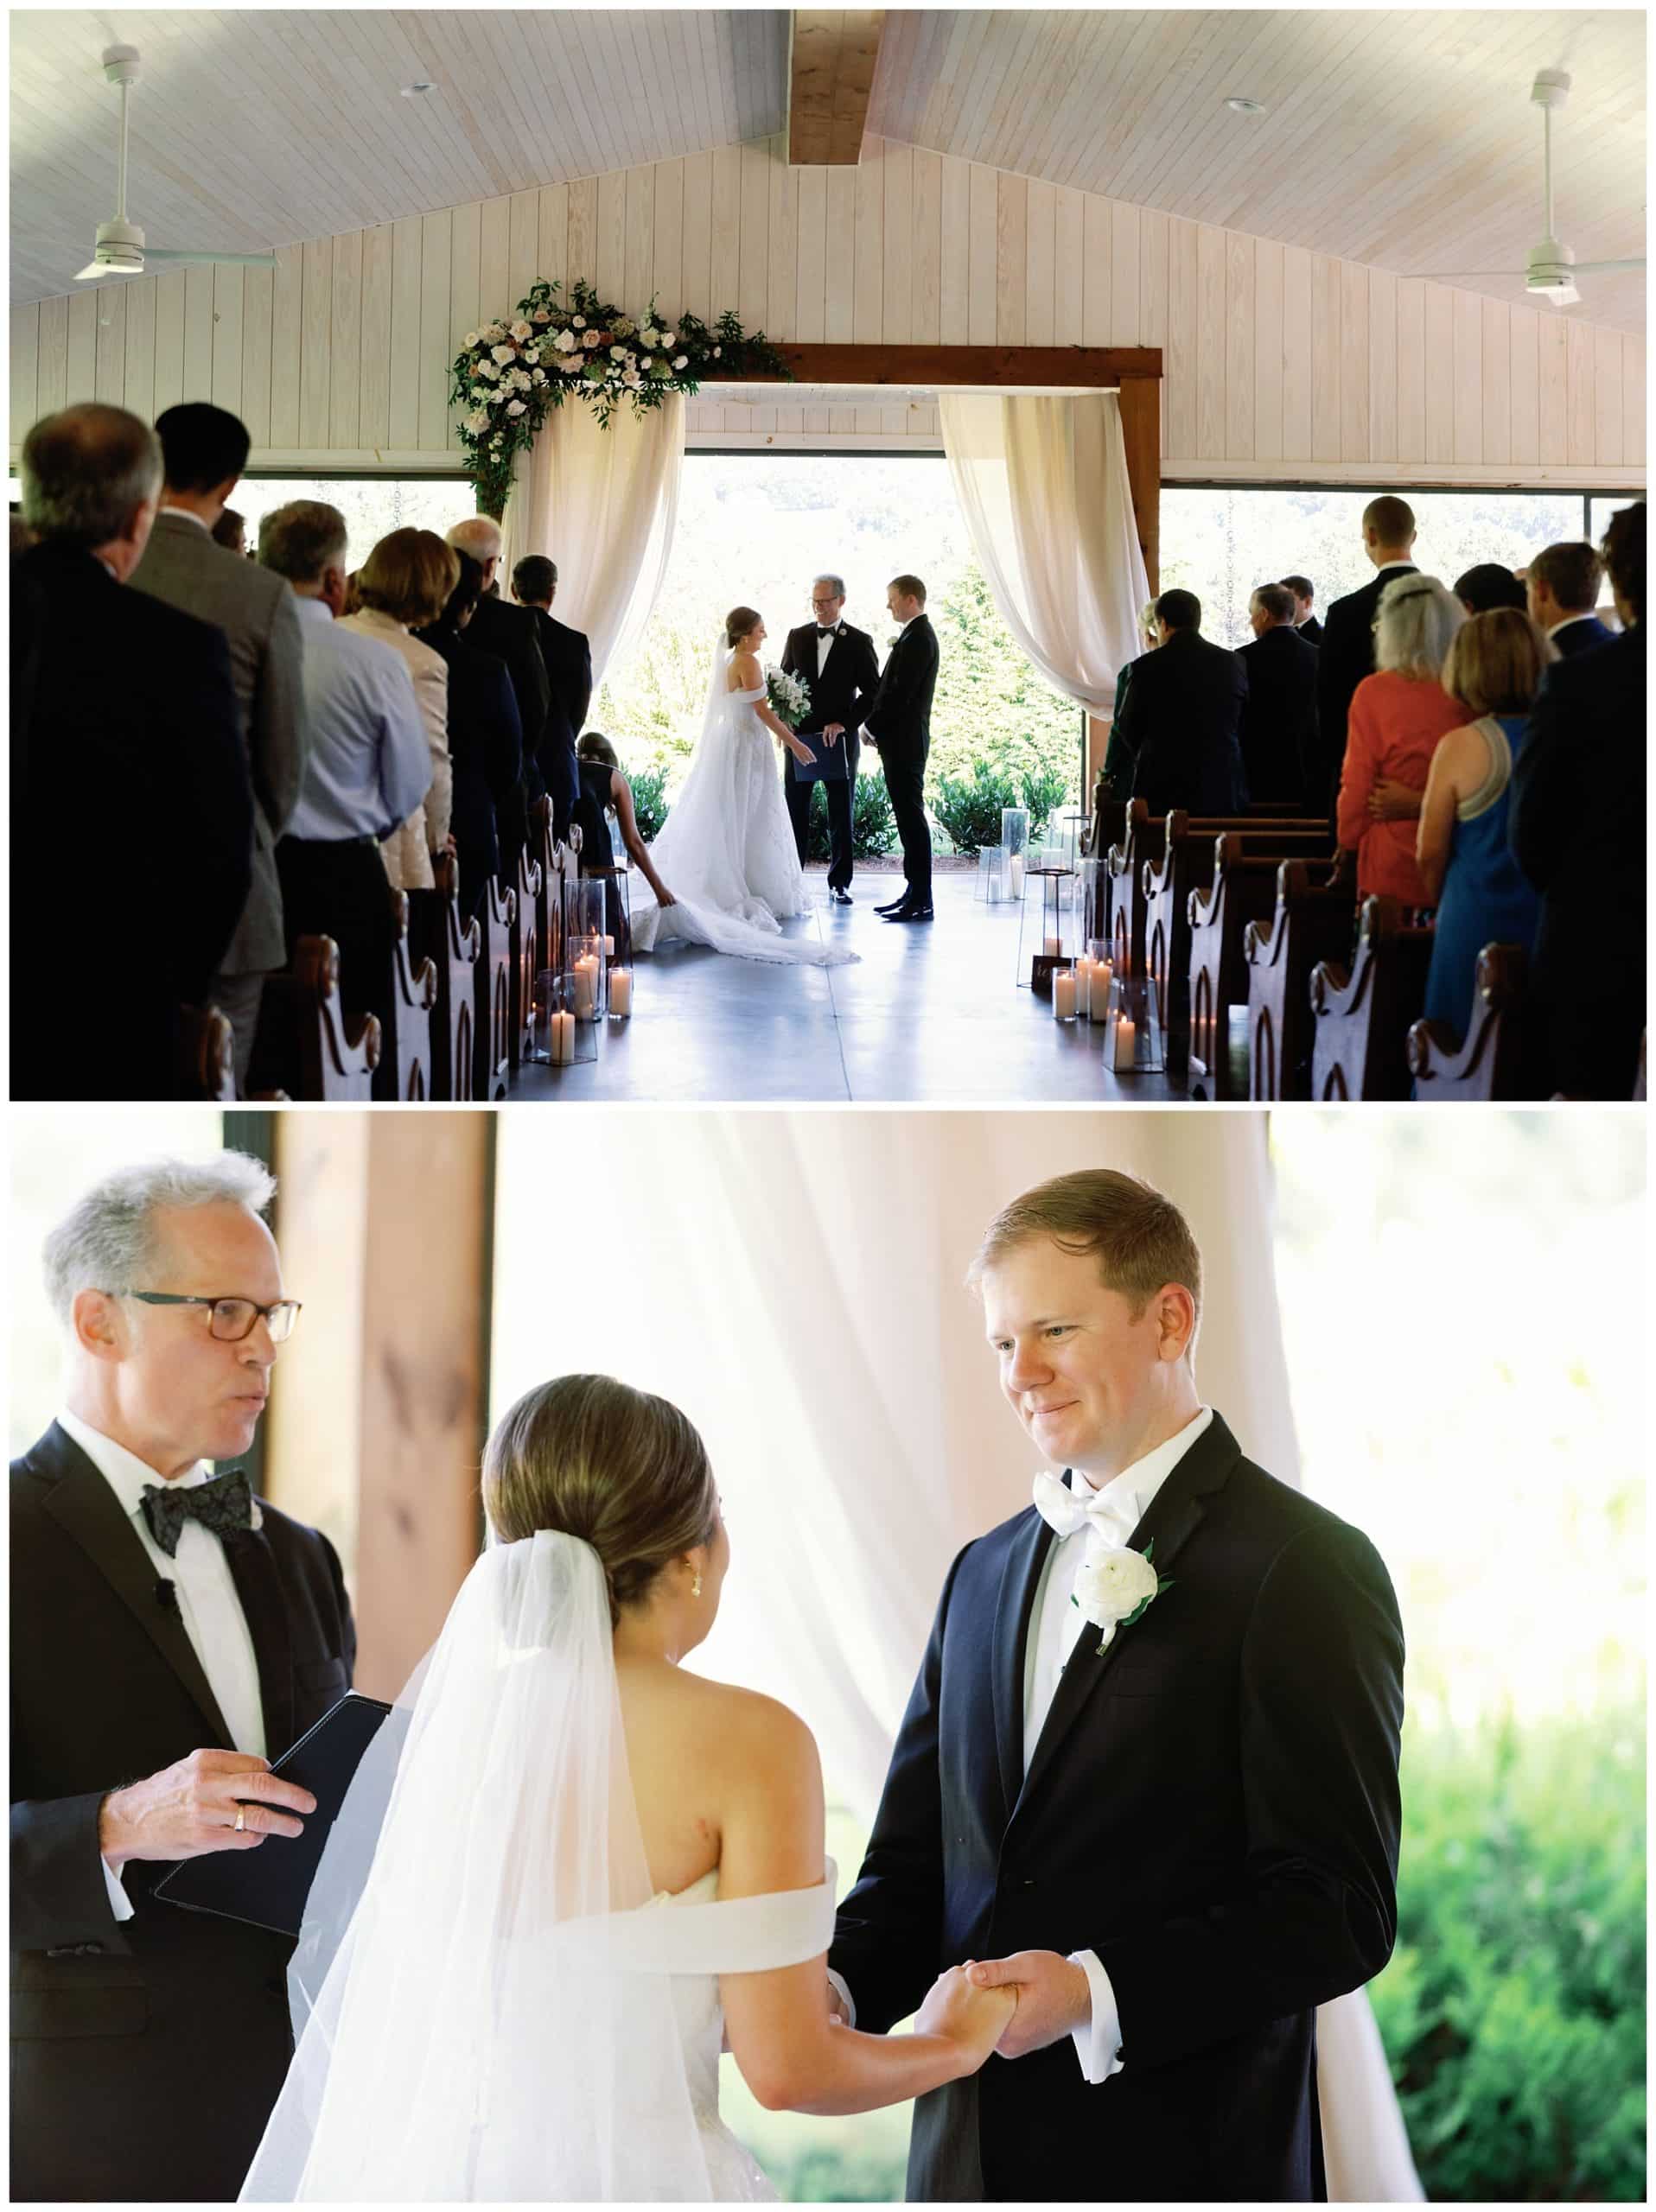 A bride and groom exchange vows during their wedding ceremony.